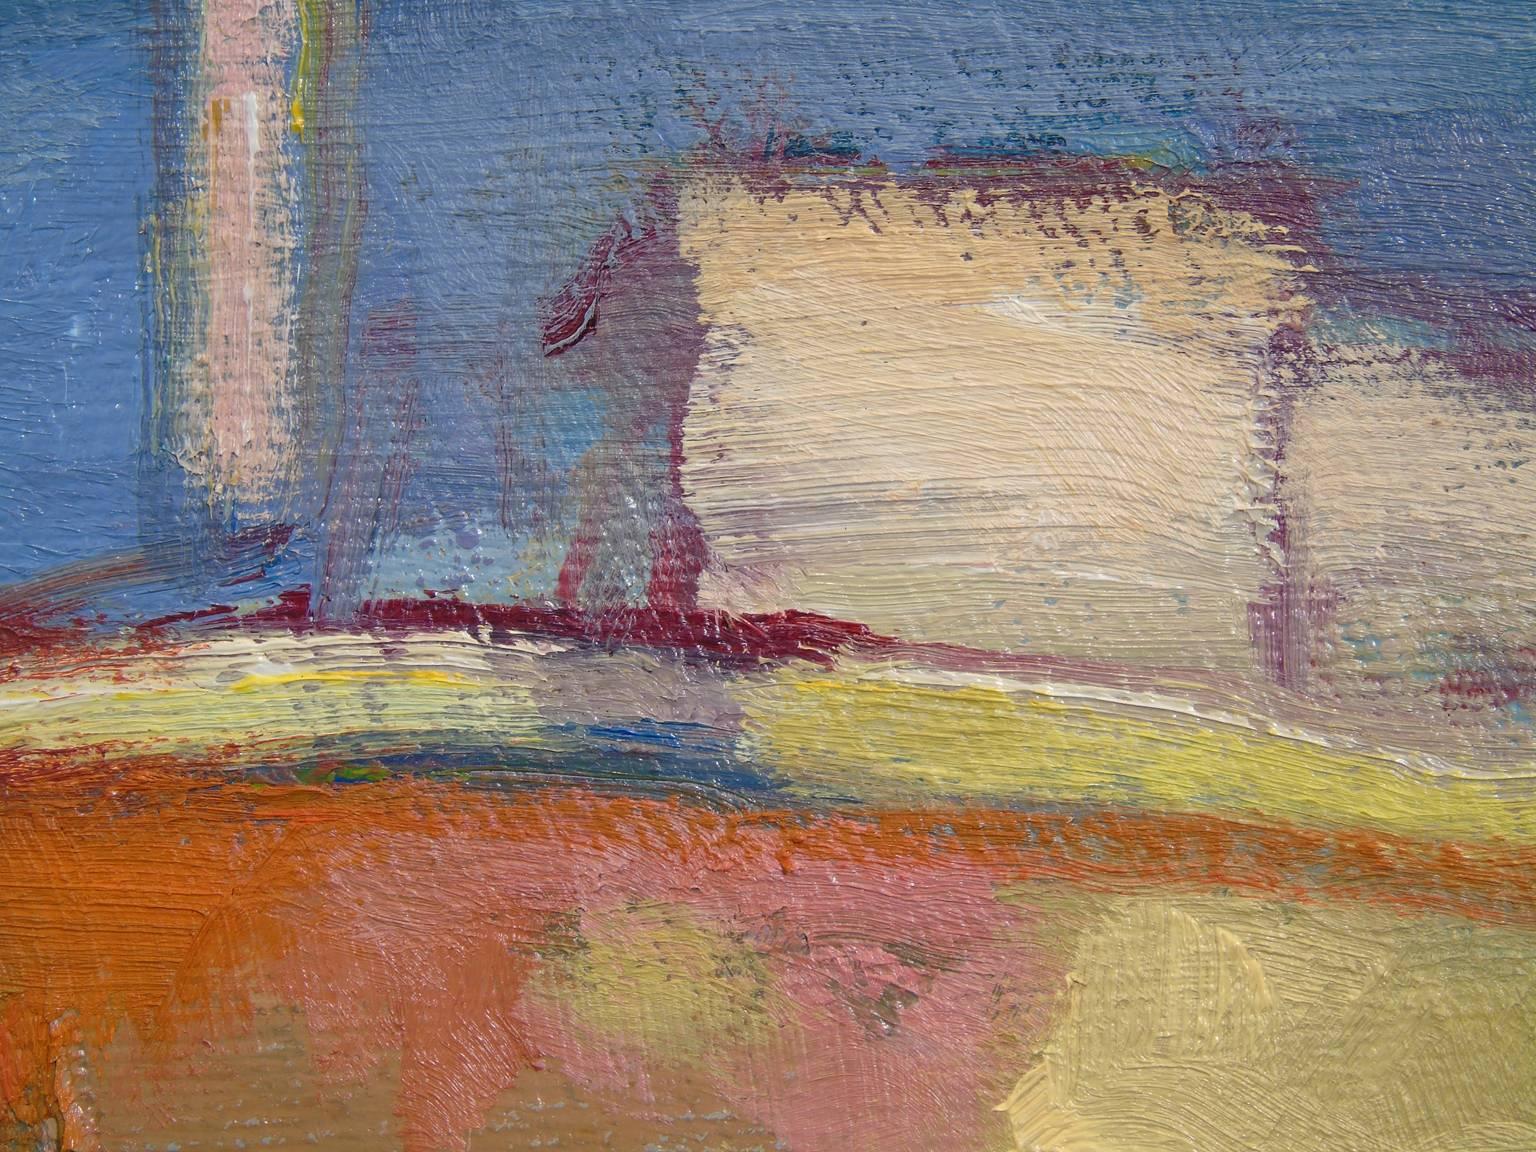 Robert Glisson is a landscape painter whose process starts in plein air but is often finished in the studio. Glisson’s landscapes explore the possibilities of shape and color. The resulting paintings edge close to abstraction and have a visceral